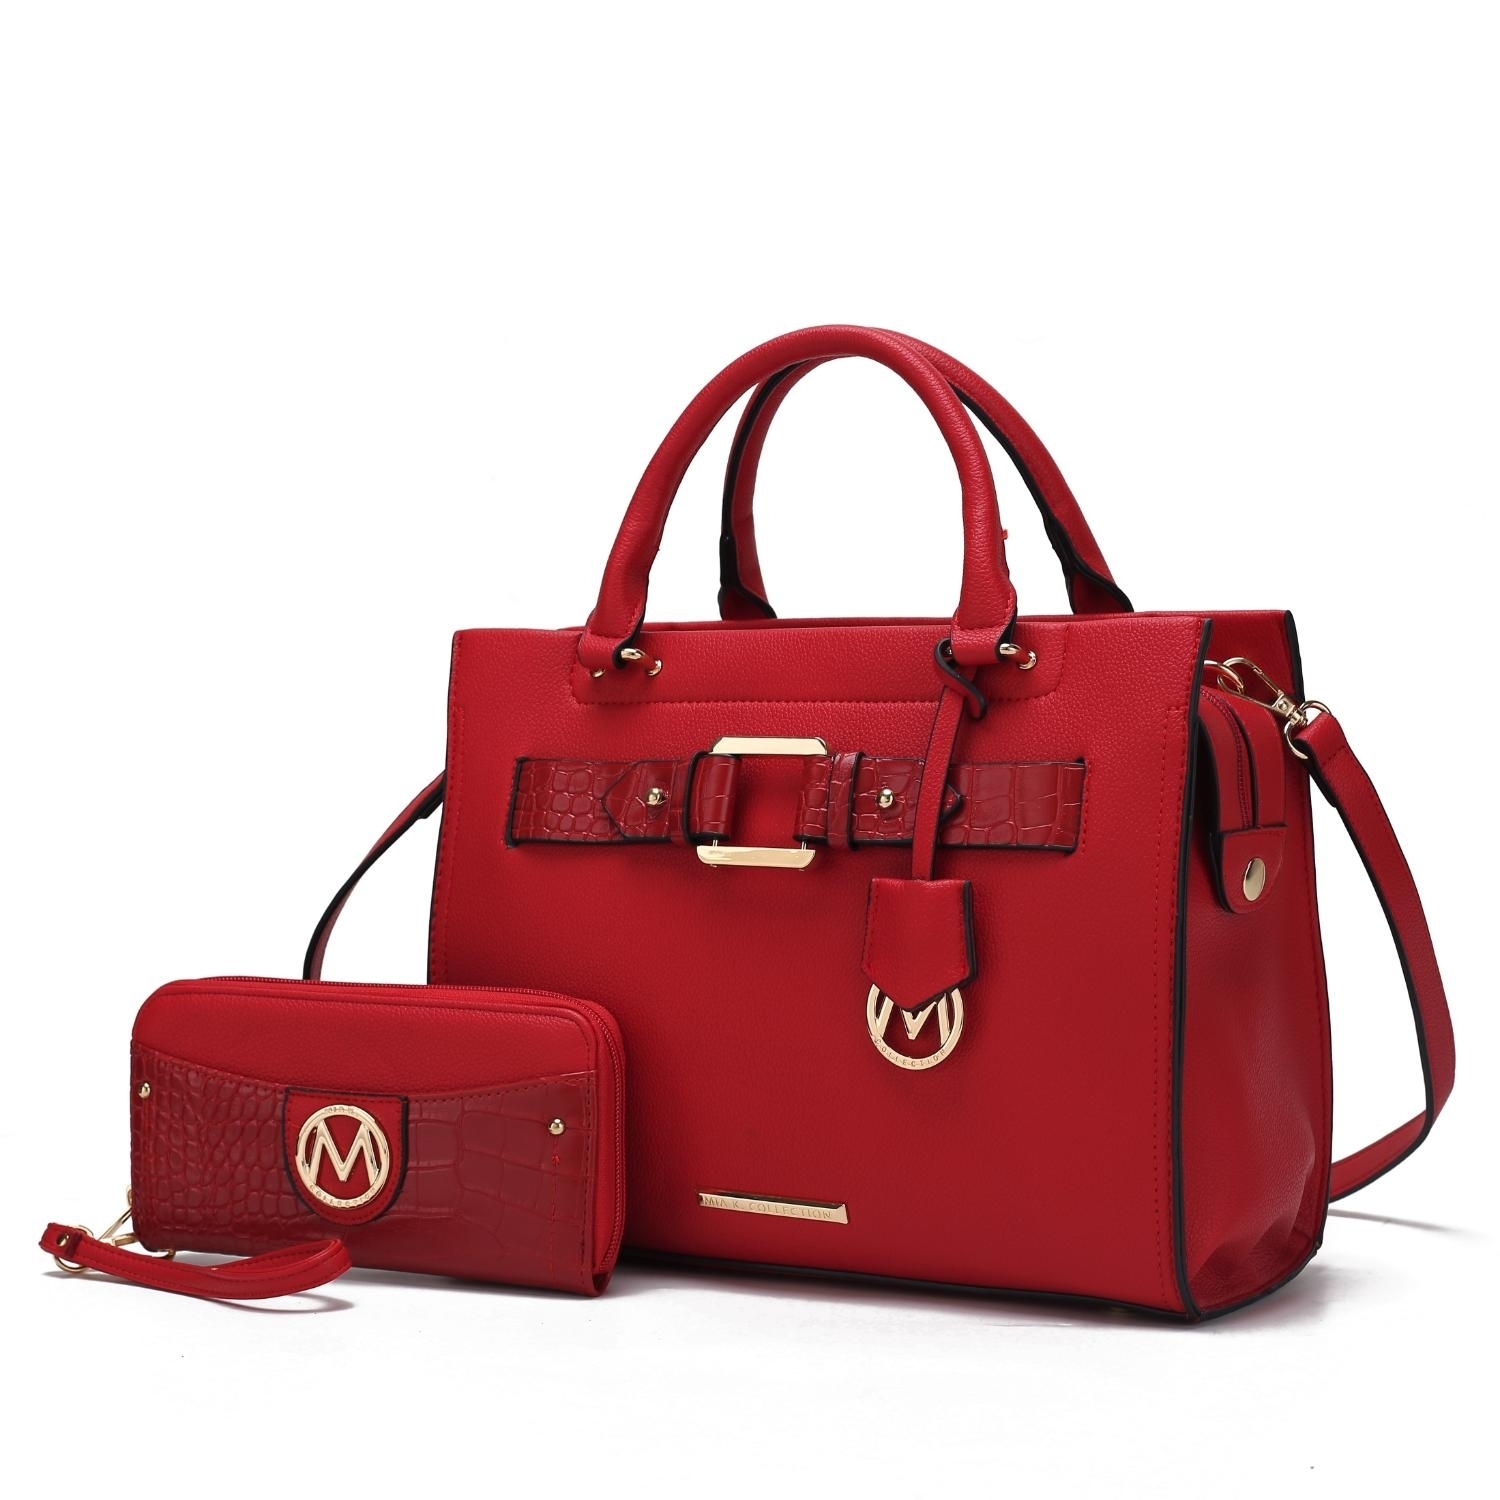 MKF Collection Virginia Vegan Leather Women's Tote Bag By Mia K With Wallet -2 Pieces - Red